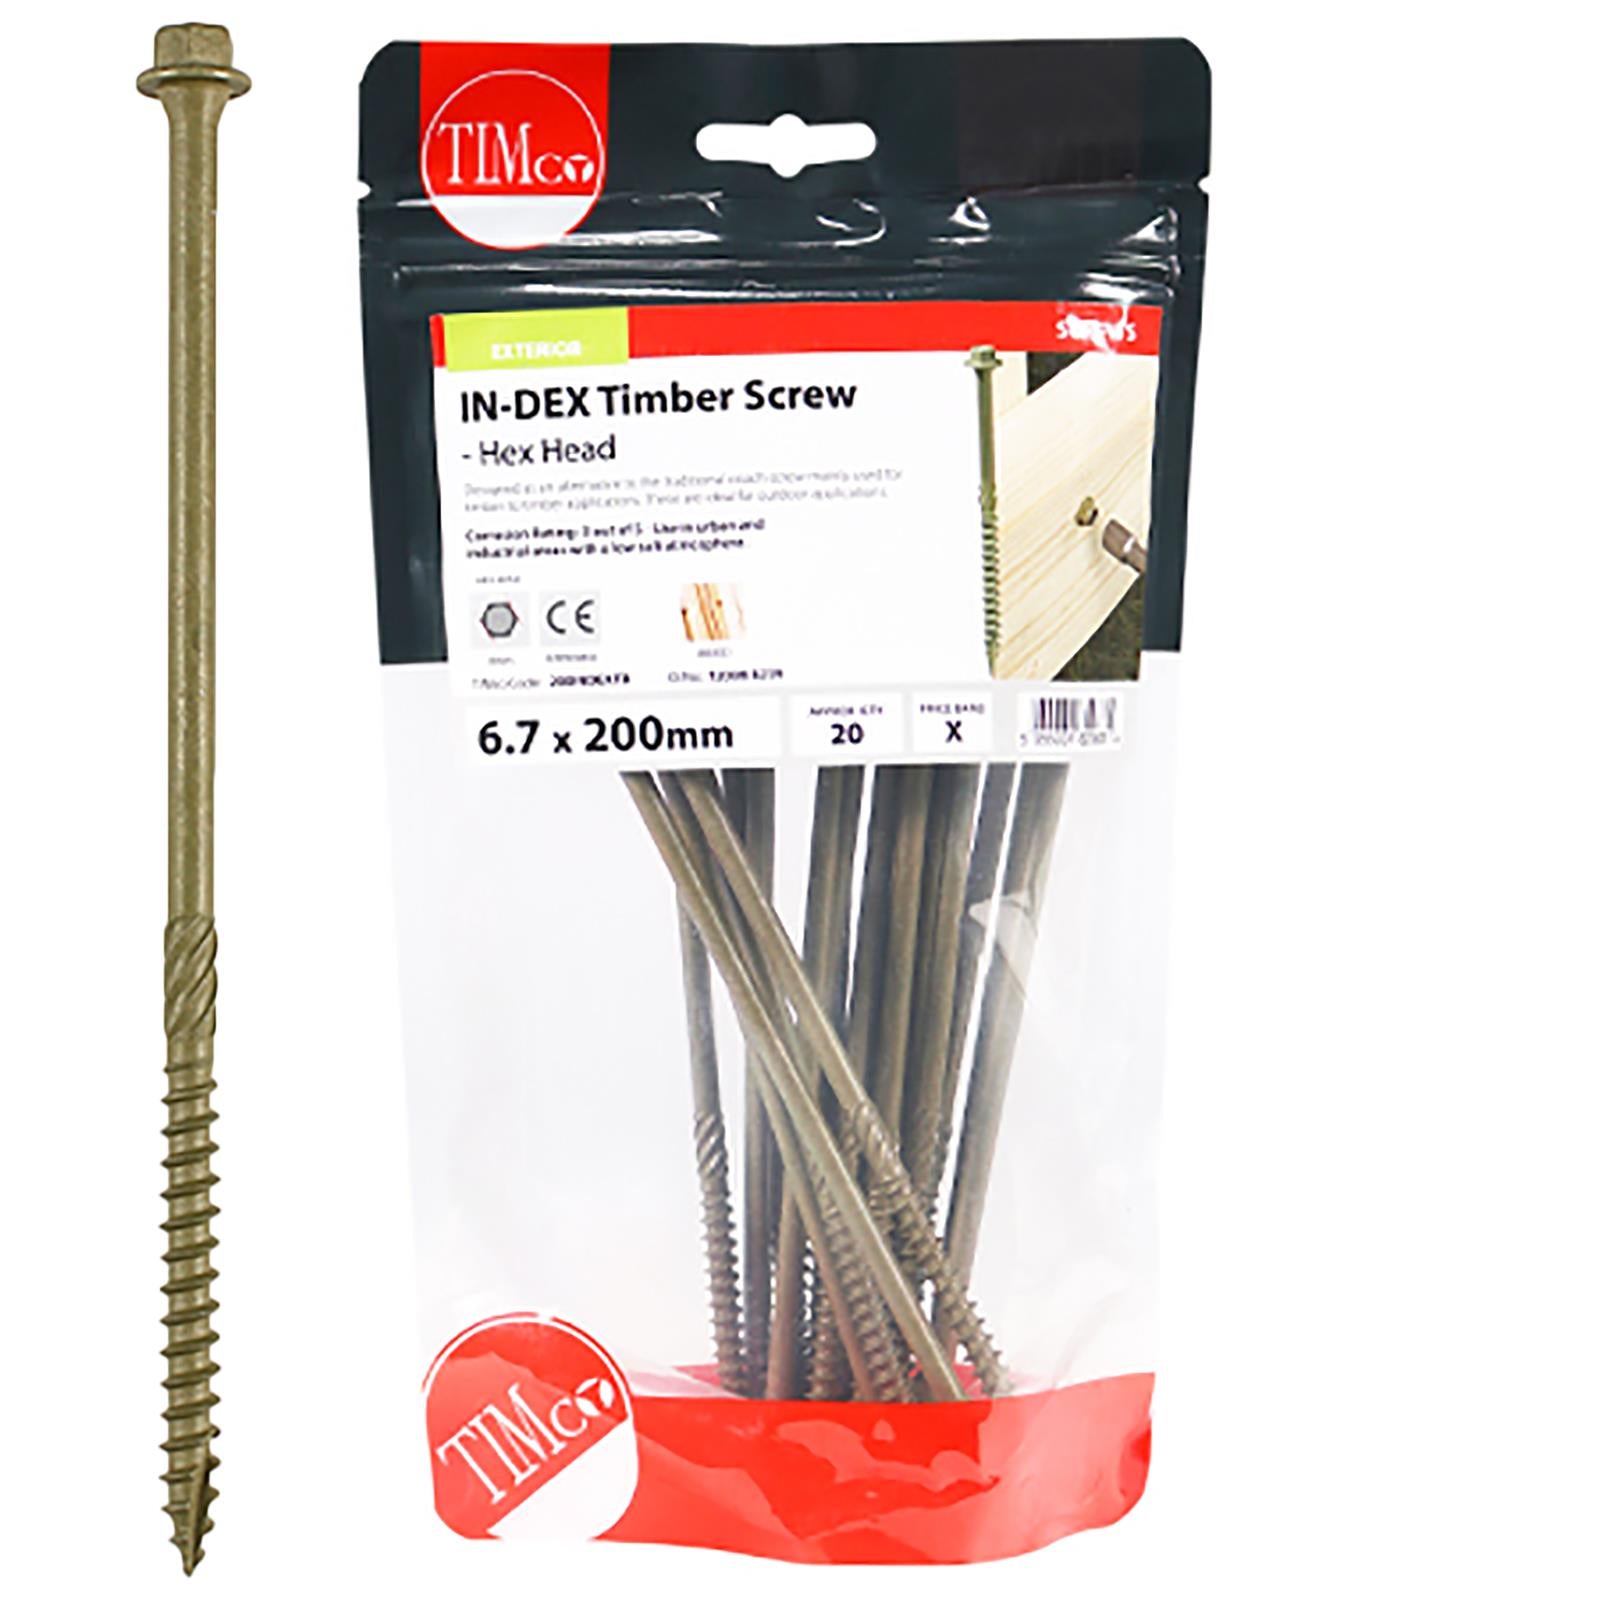 TIMCO Timber Framing and Landscaping Screws Hex Head Exterior Green Orgainc 6.7mm